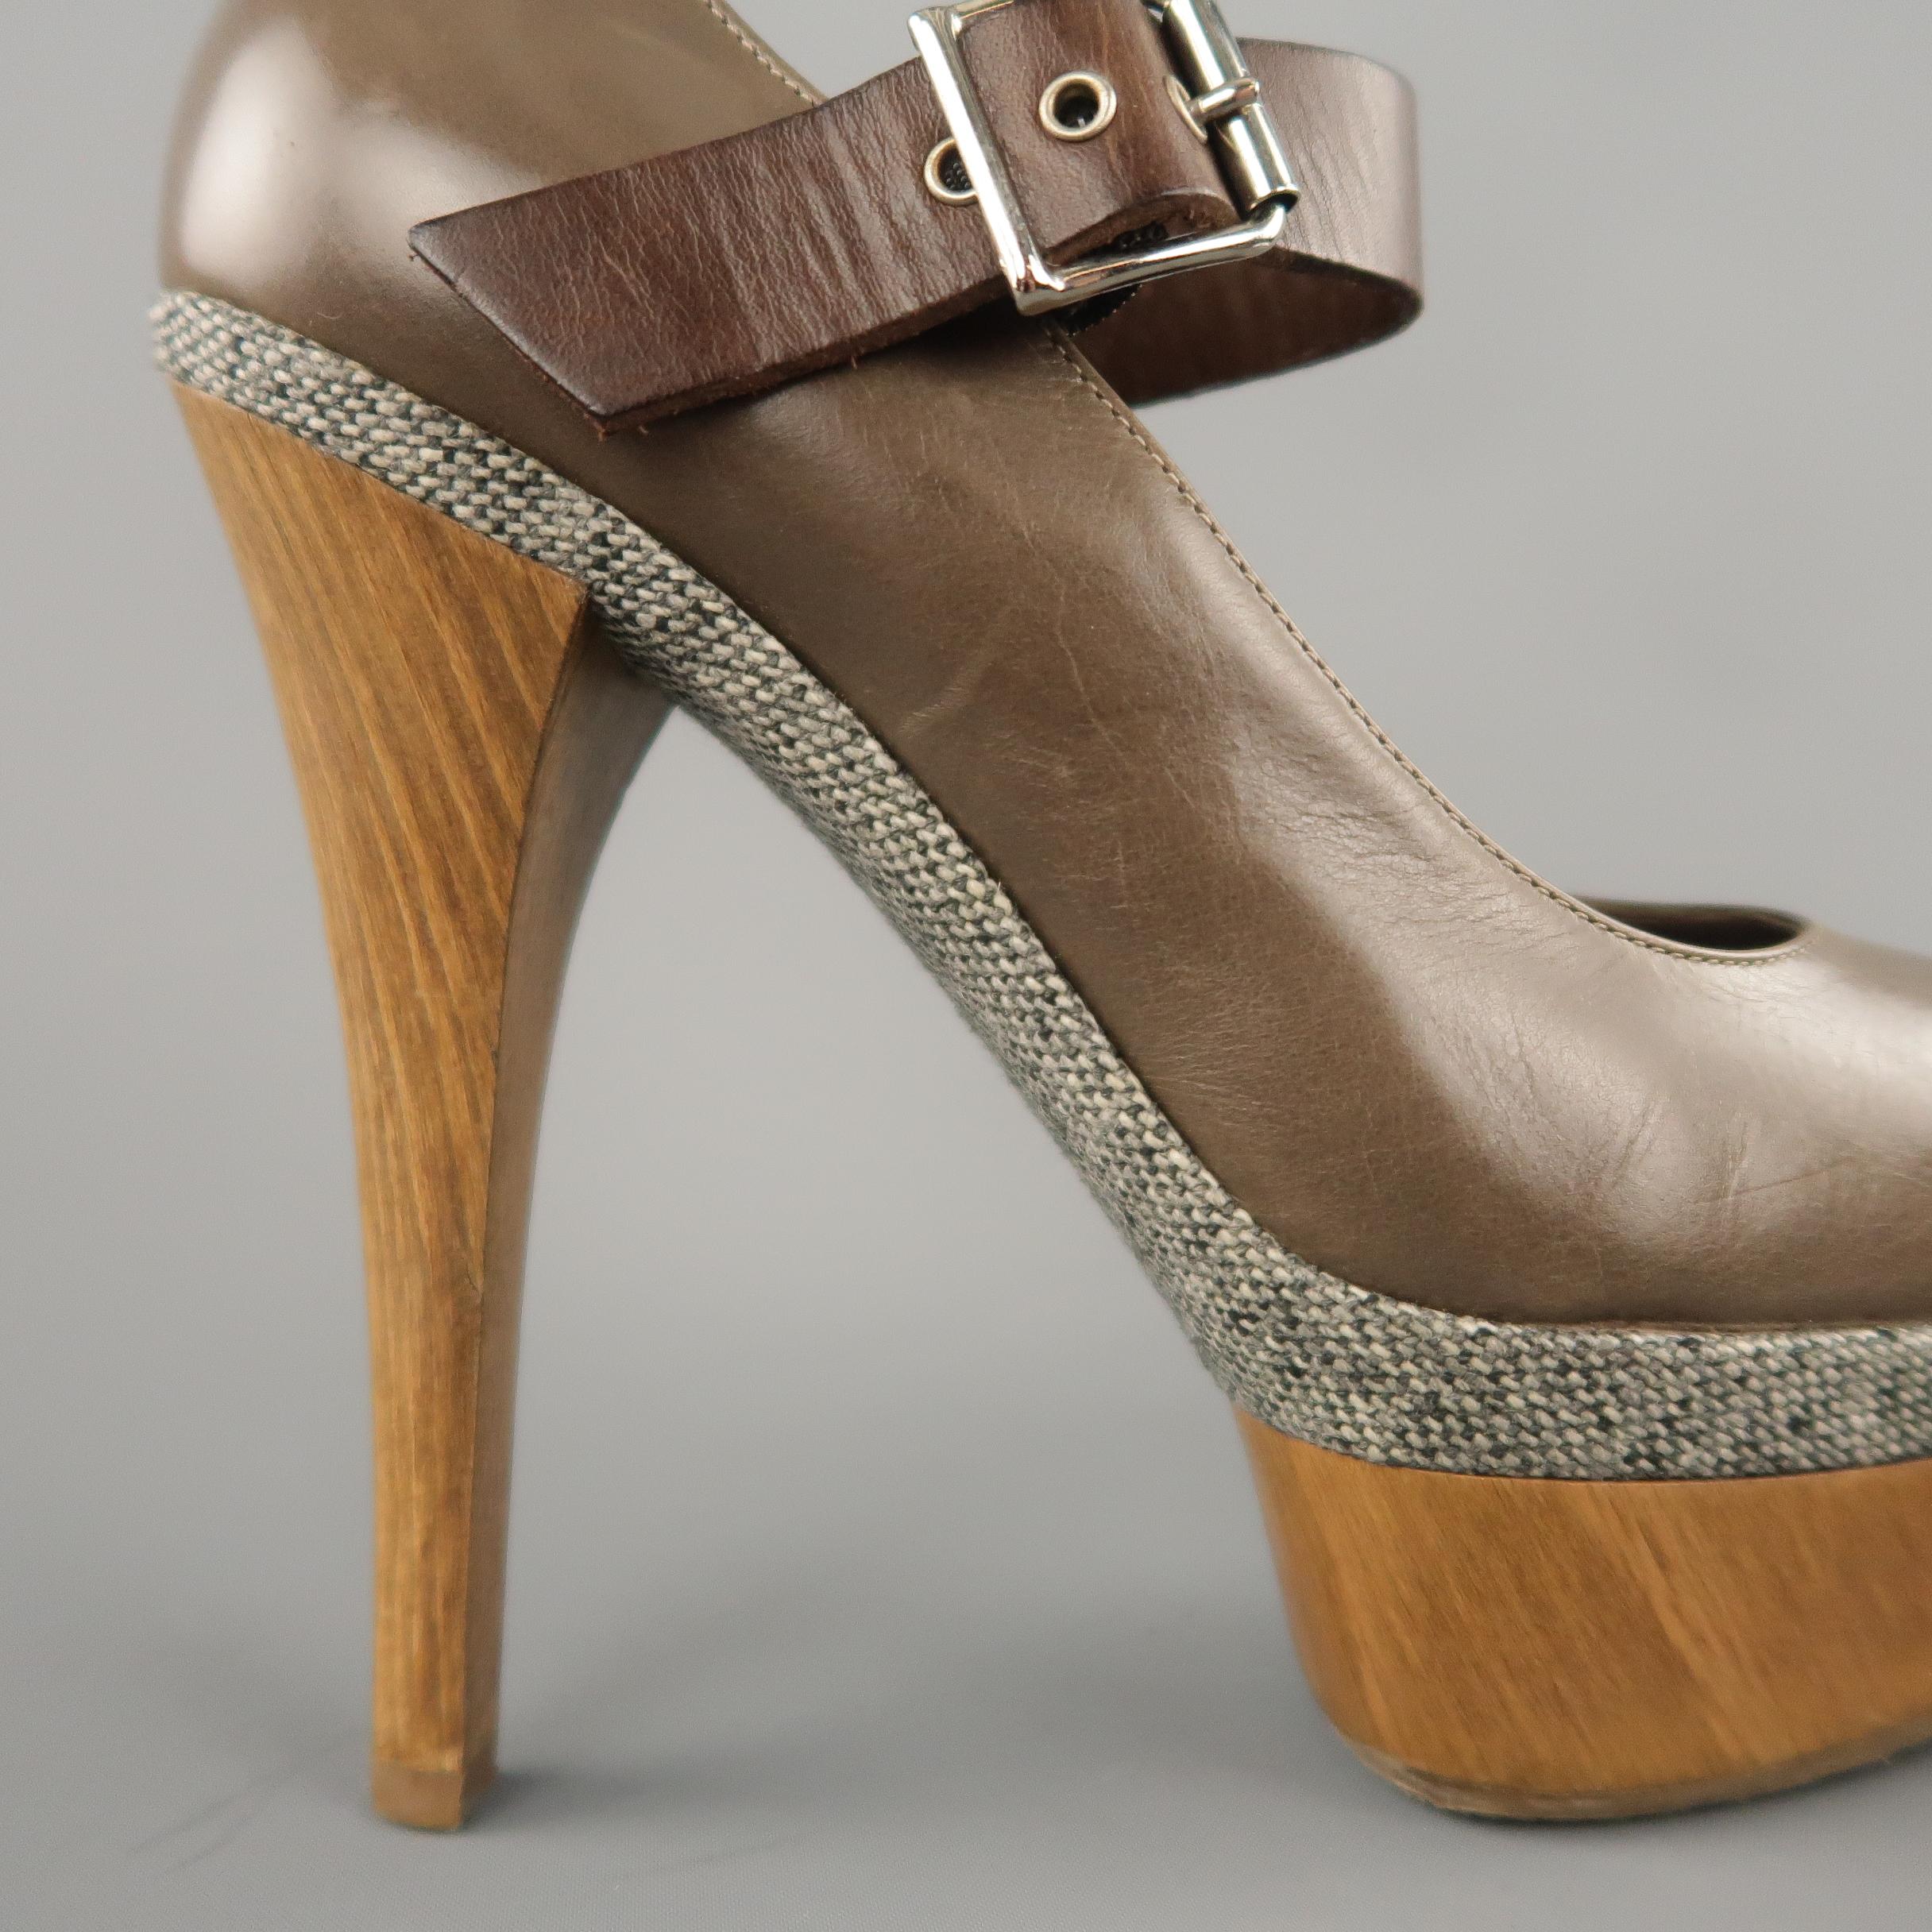 MARNI pumps come in taupe leather with a Mary Jane strap, peep toe, gray tweed mid panel, and wooden platform and heel.
 
Excellent Pre-Owned Condition.
Marked: (no size)
 
Measurements:
 
Heel: 5.45 in.
Platform: 1.5 in.